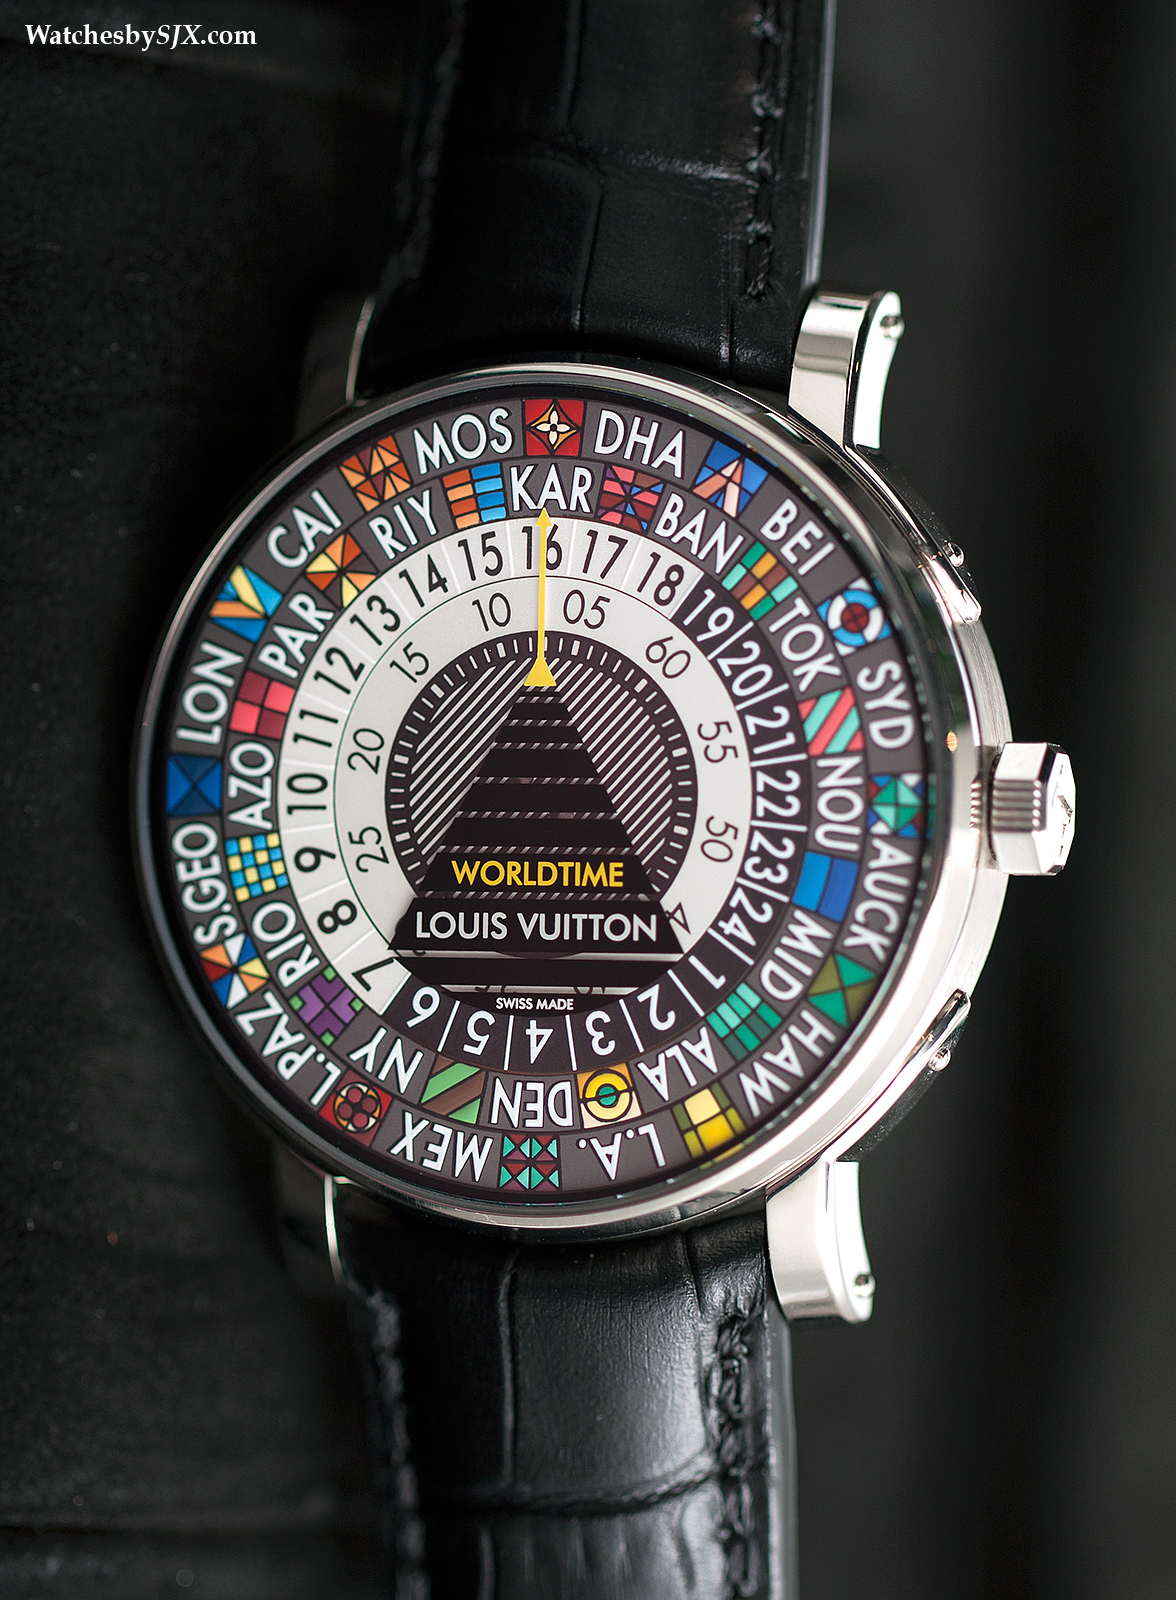 Introducing the Louis Vuitton Escale Worldtime, With the World in  Hand-Painted Colour (with live photos and price)